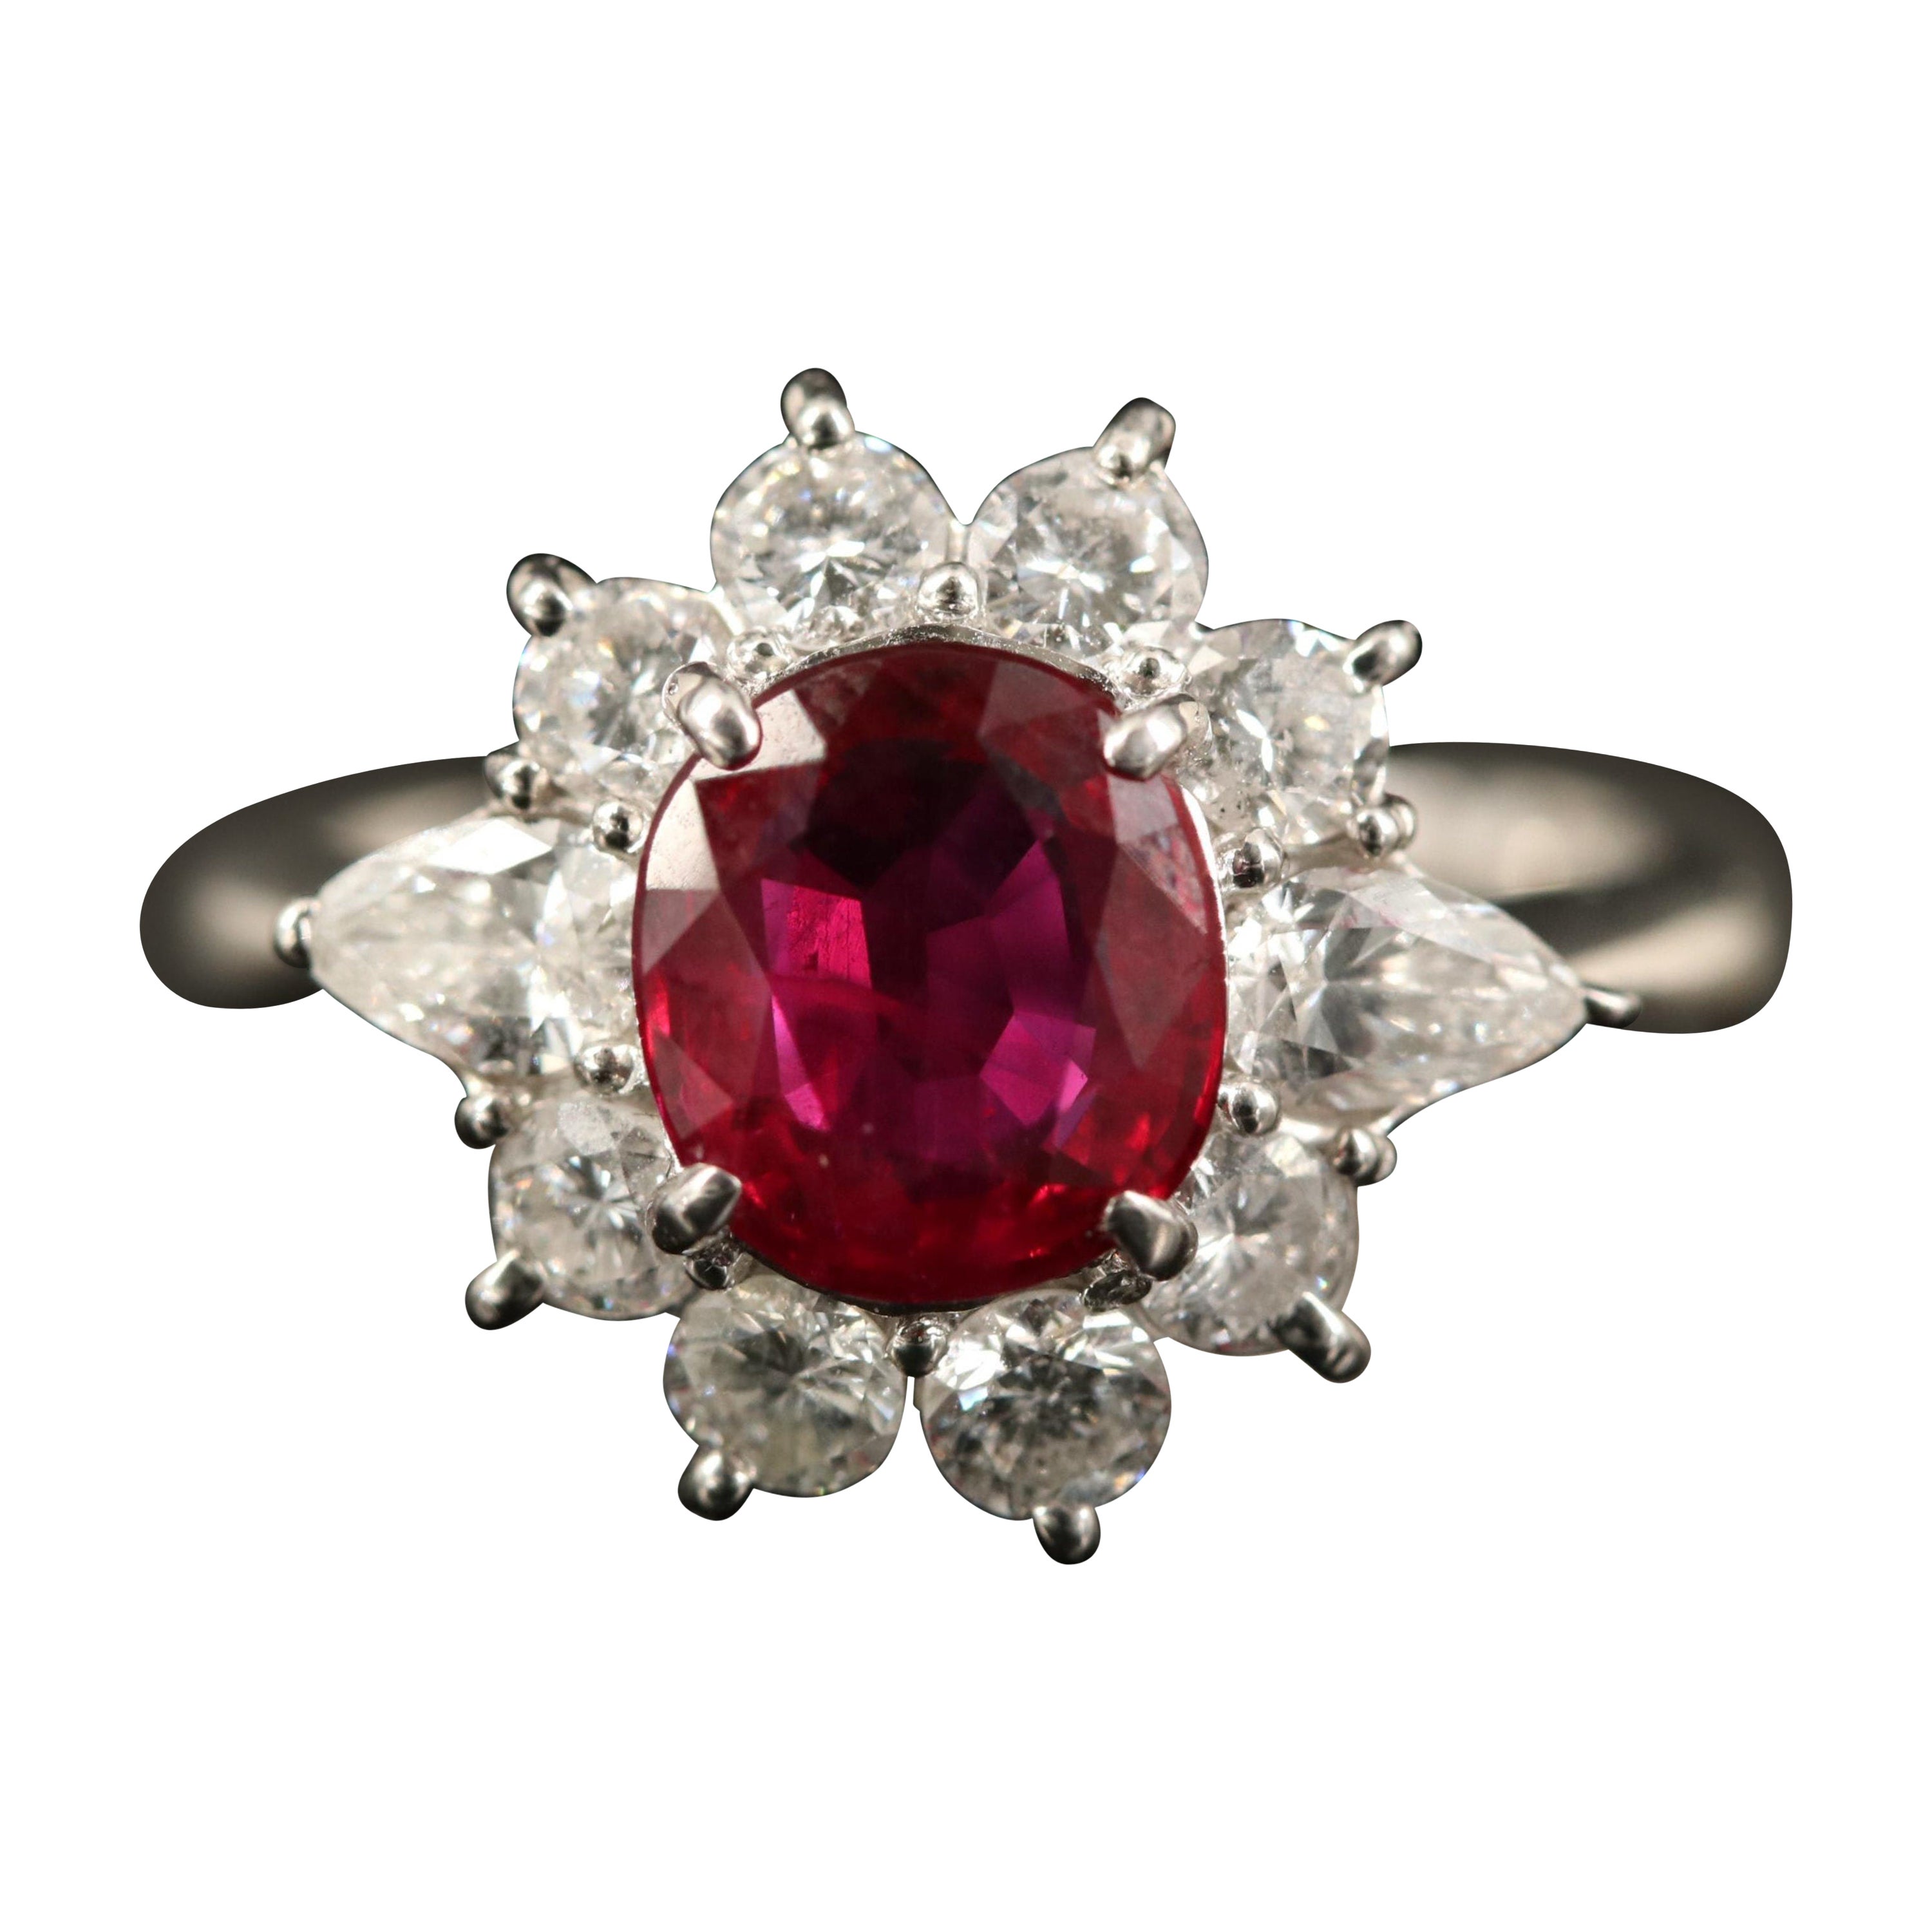 For Sale:  1.6 Carat Antique Floral Ruby Diamond Engagement Ring Gold Ruby Wedding Ring